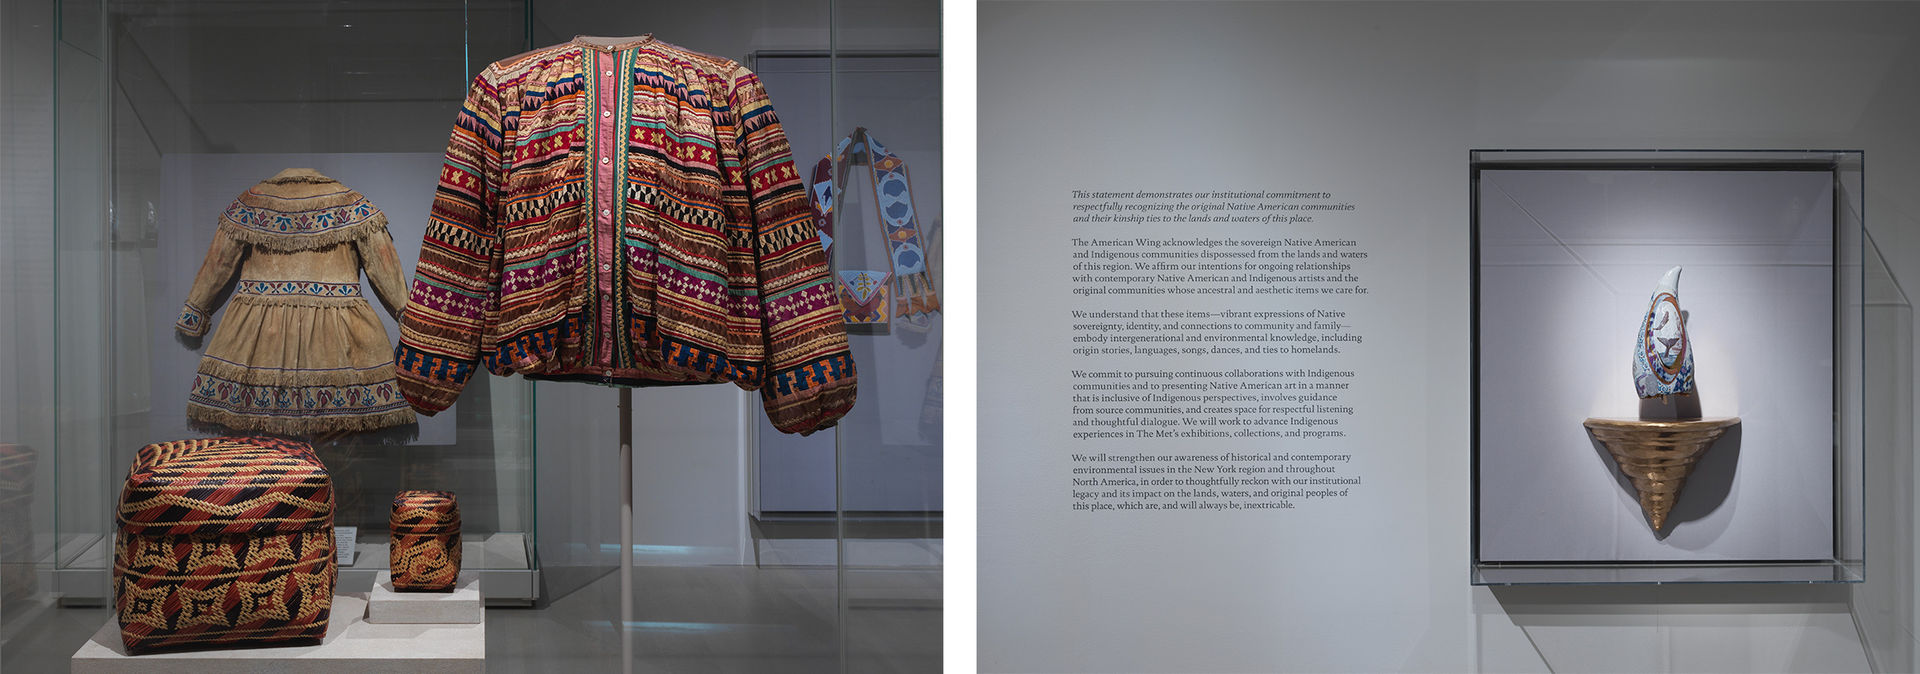 Two photos of the exhibition Art of Native America